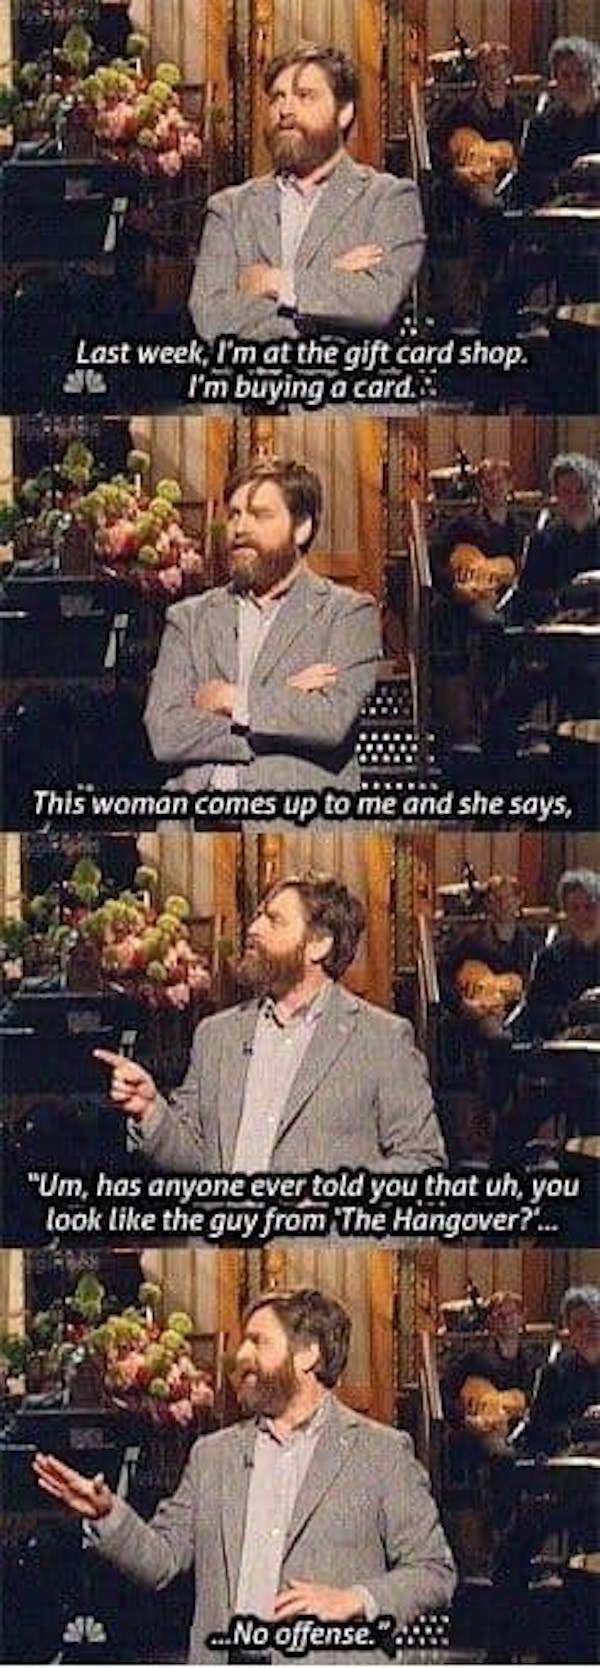 Zach Galifianakis - Last week, I'm at the gift card shop. 31 I'm buying a card. This woman comes up to me and she says, "Um, has anyone ever told you that uh, you look the guy from The Hangover?'... ..No offense."..